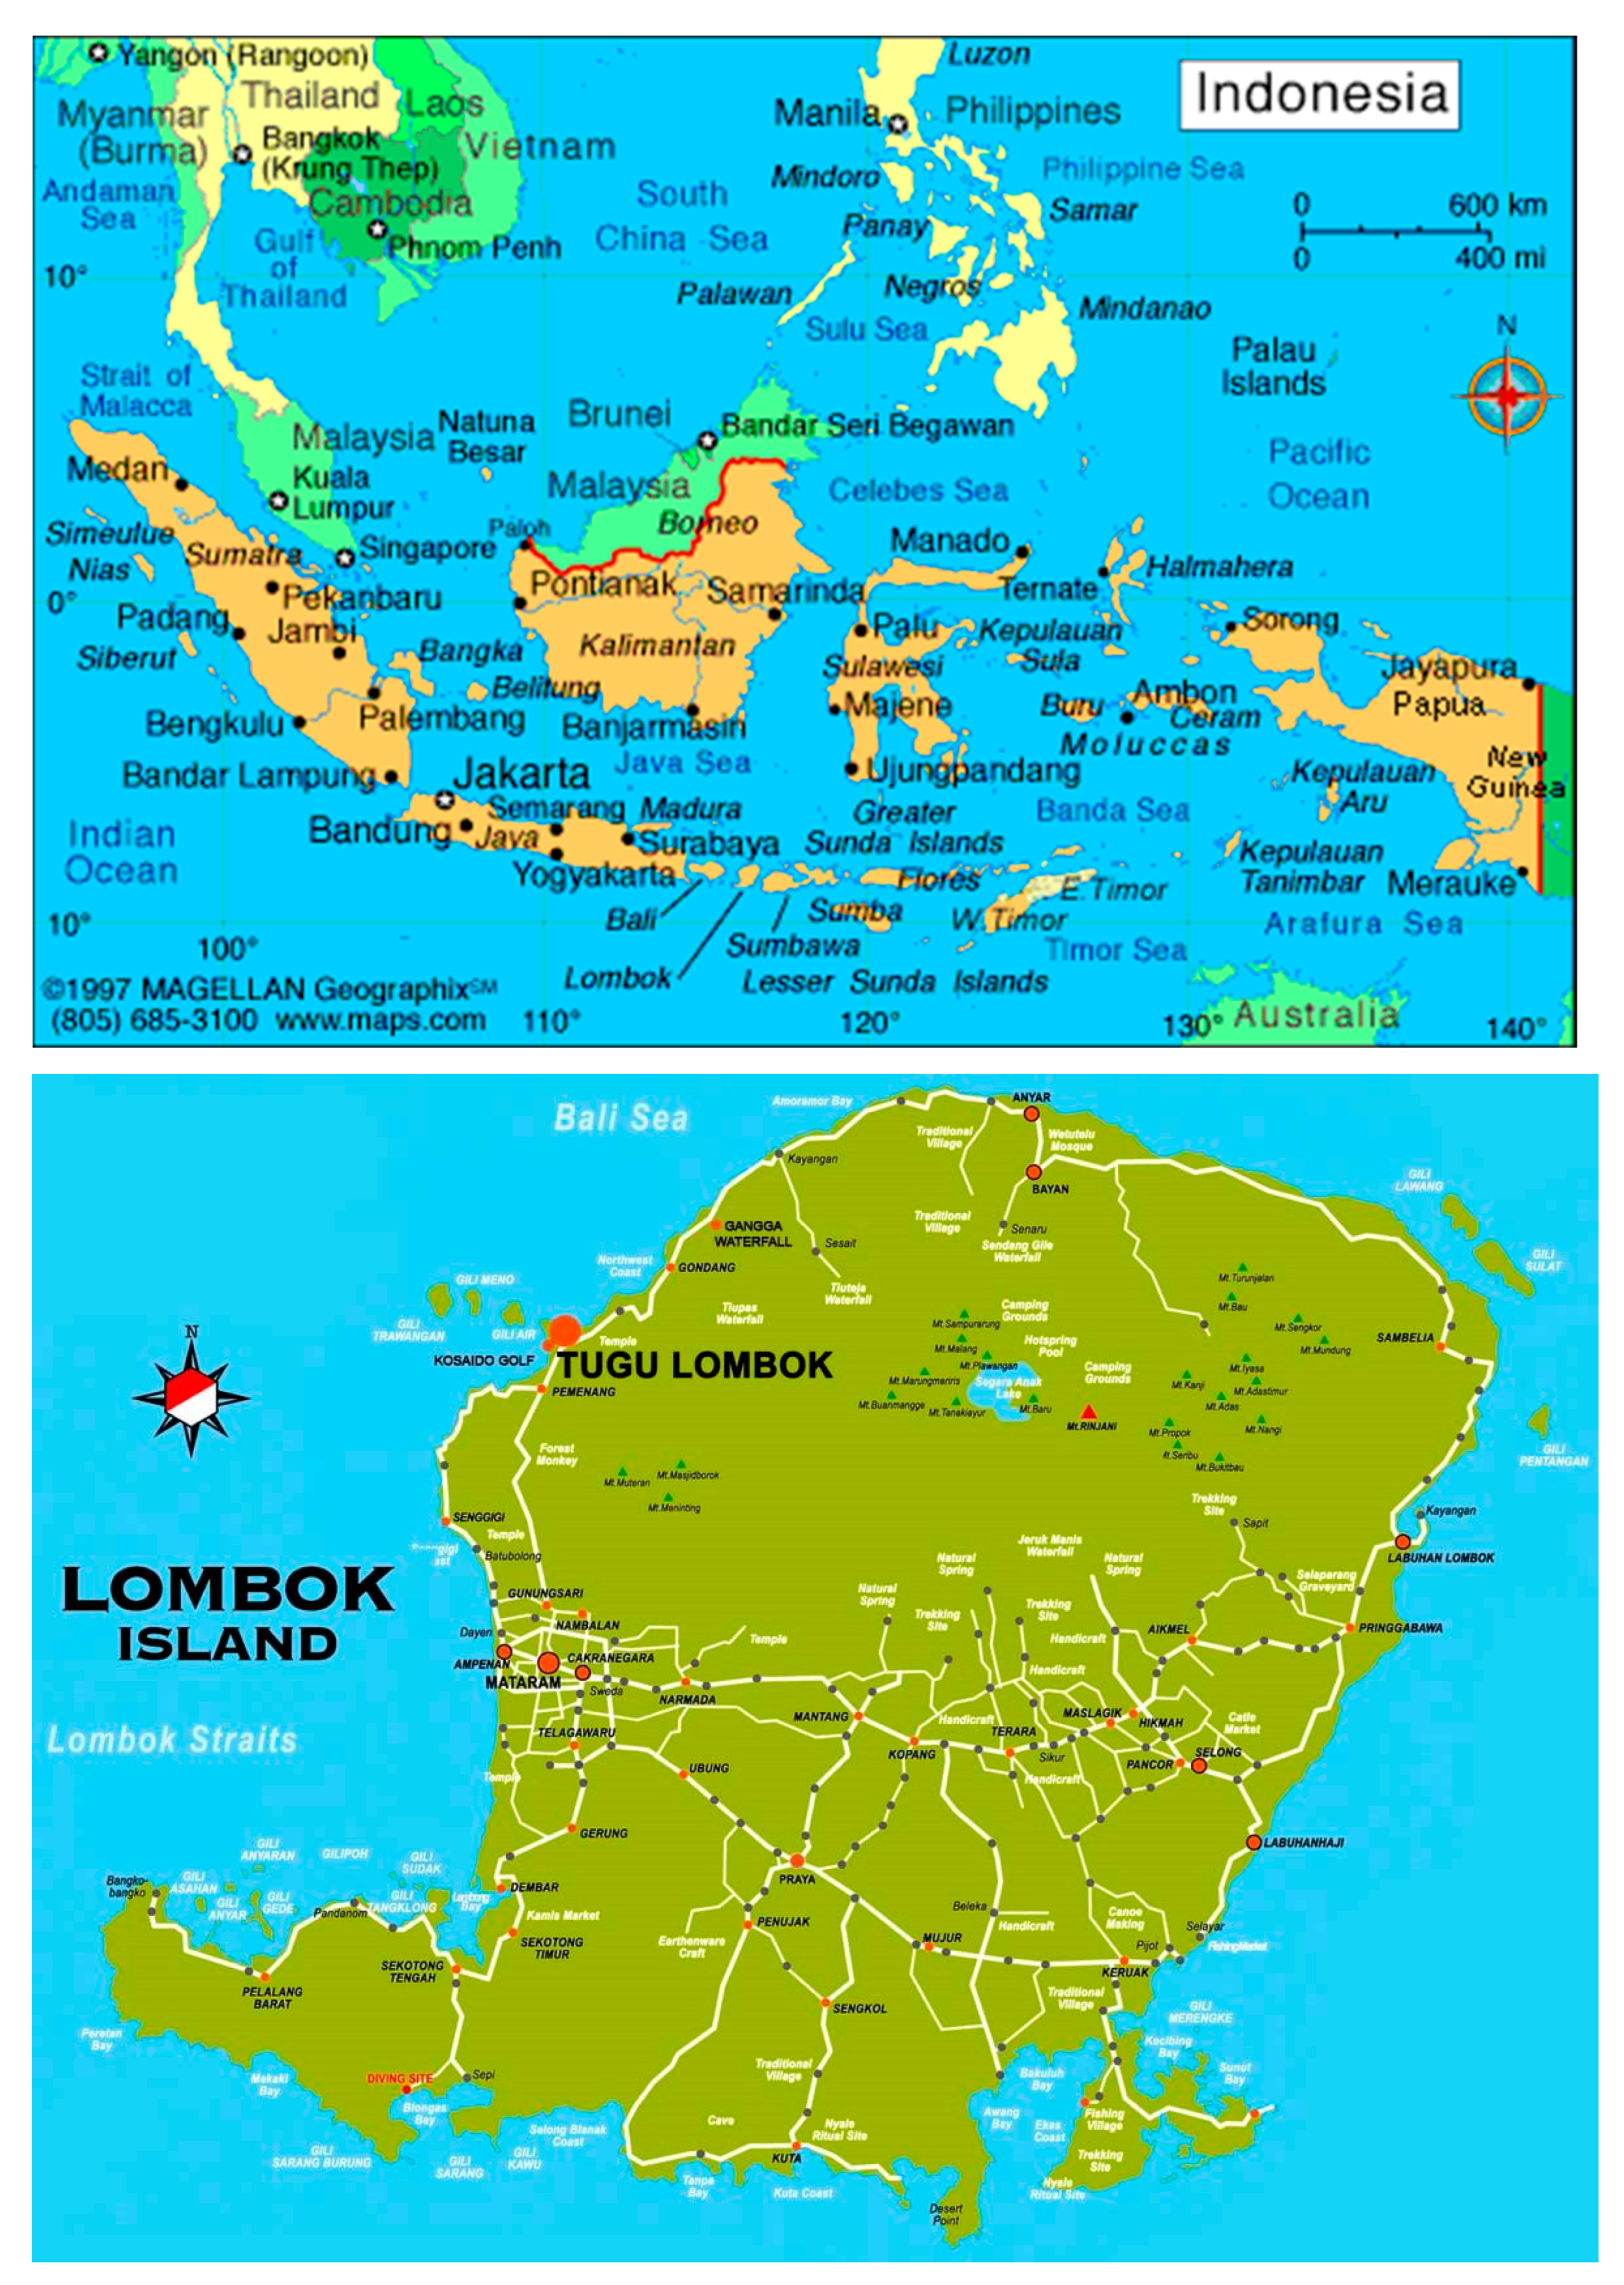 Lombok, Indonesia - April 8, 2022: Top and most popular clothing